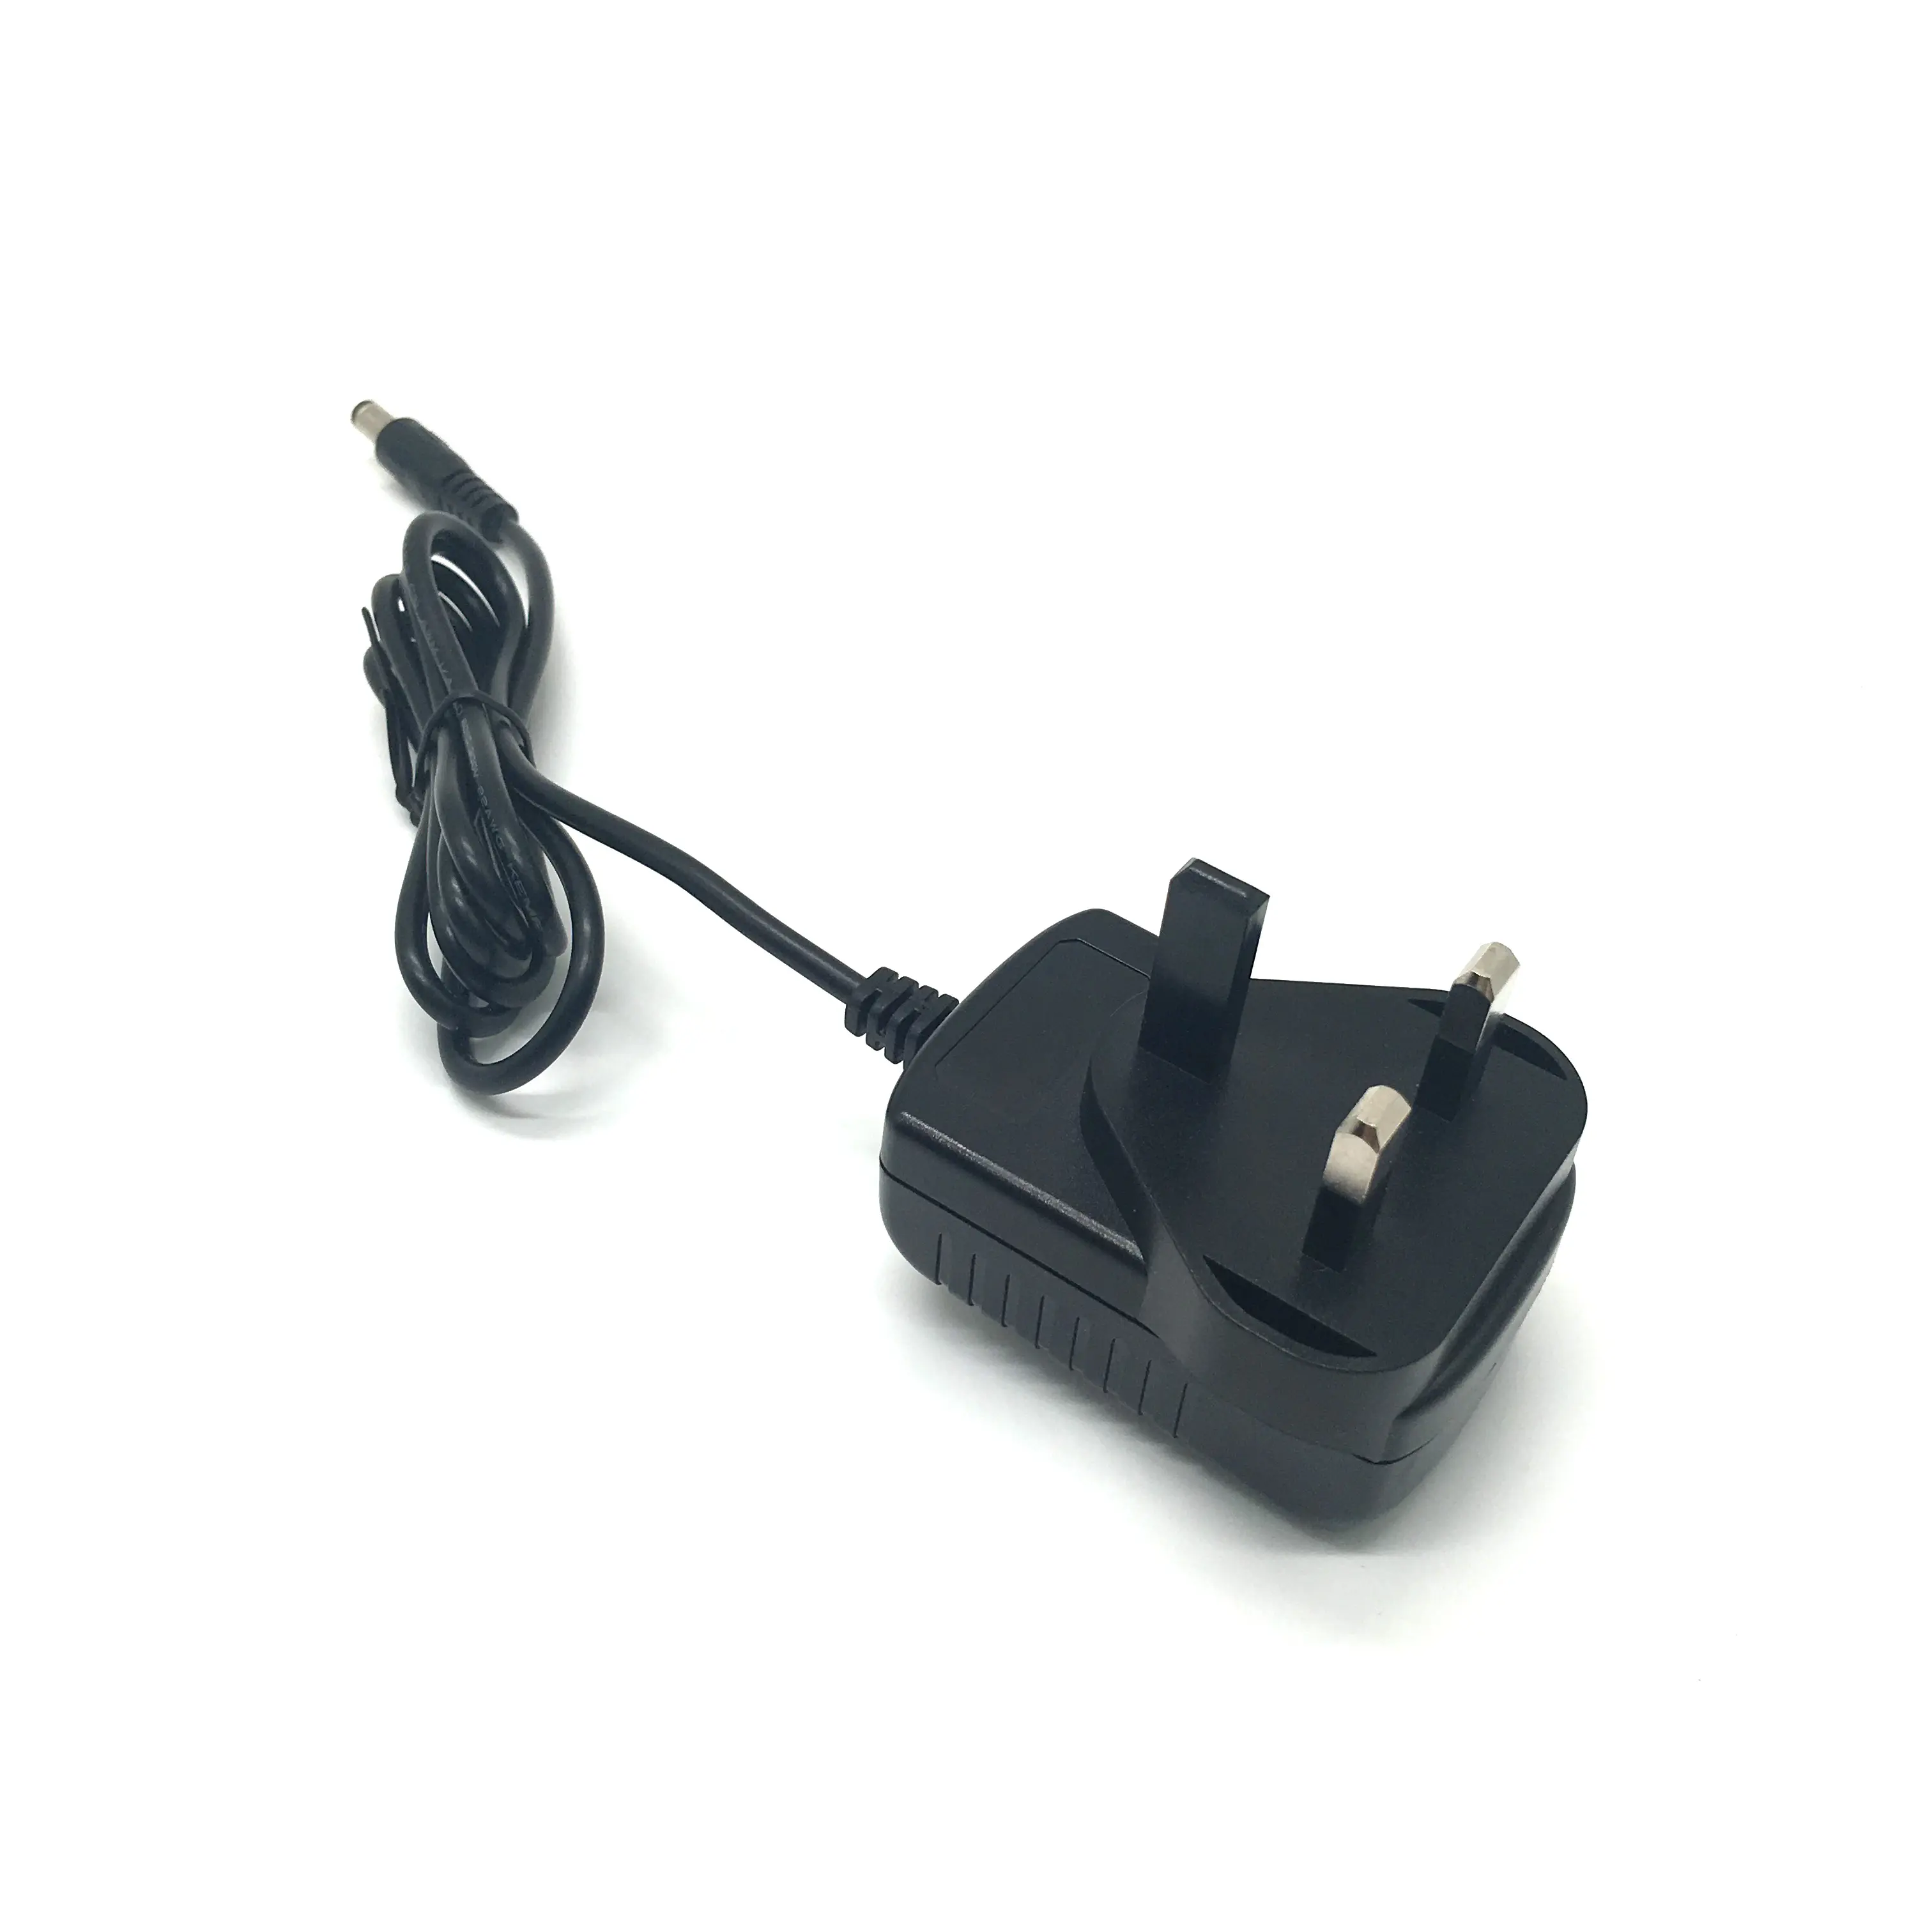 Amazon Hot Selling CE FCC RoHs Certified UK Powerline Adapter UK Wall Adapter UK Mobile Adapter